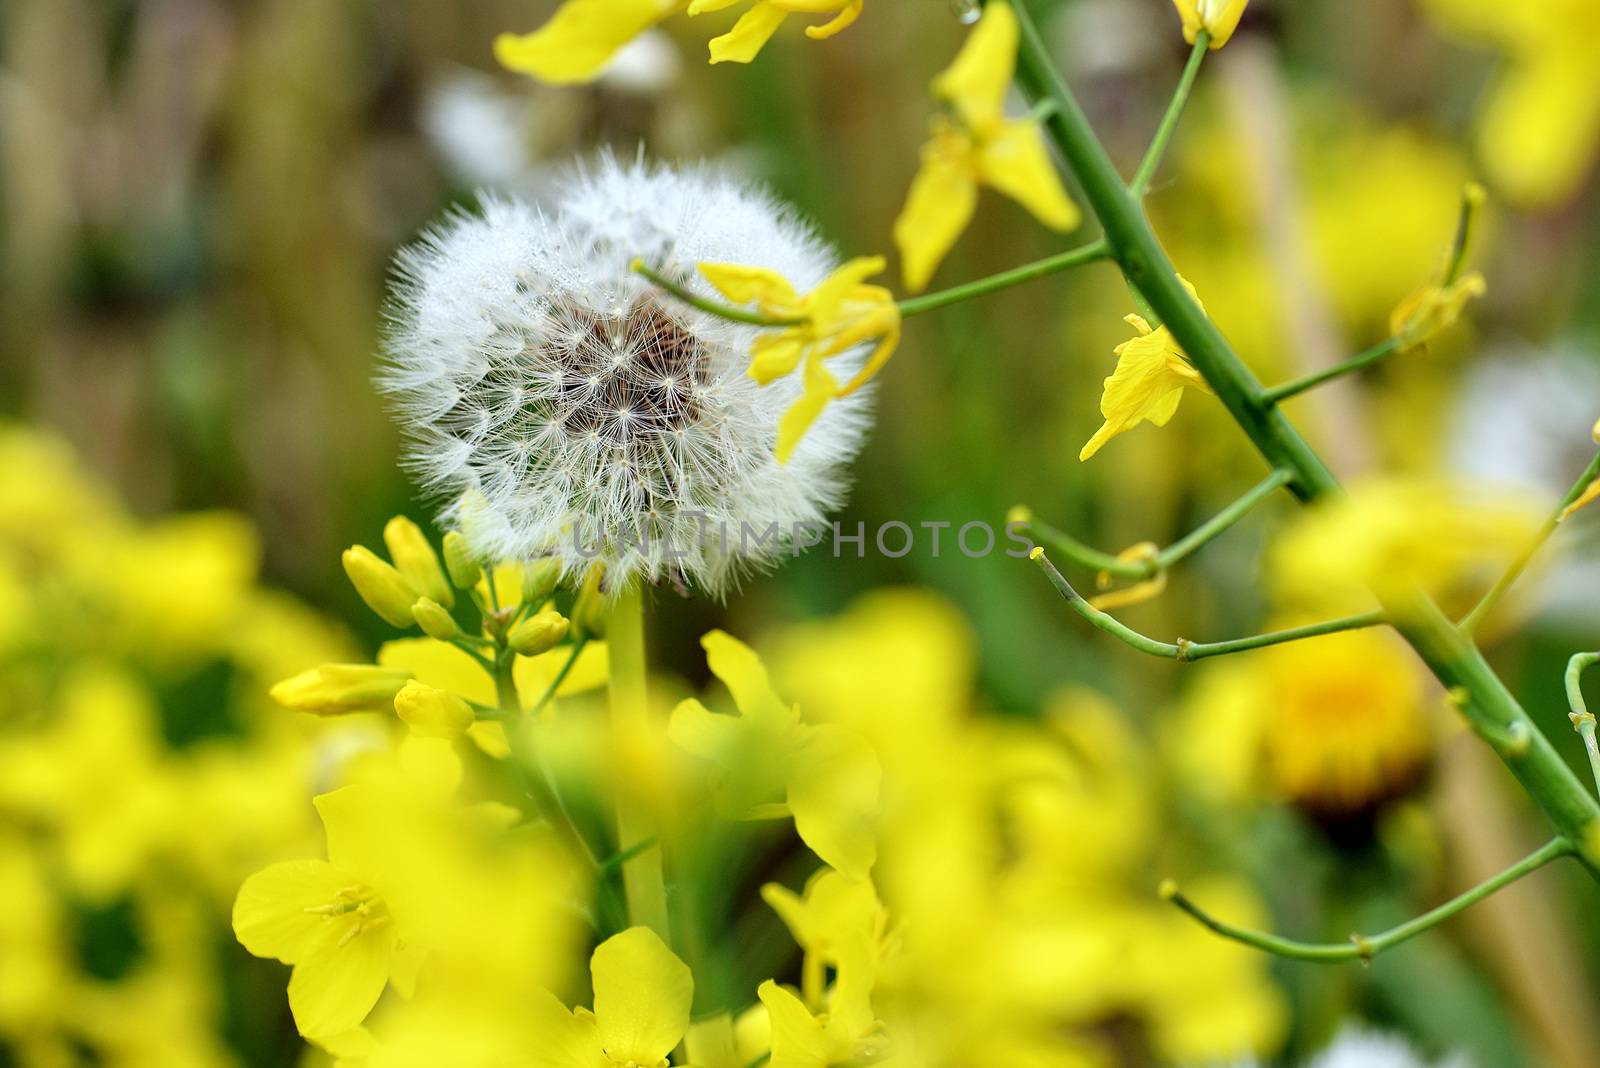 Selective focus close-up photography. It is flowering dandelion with white fuzz growing canola field.